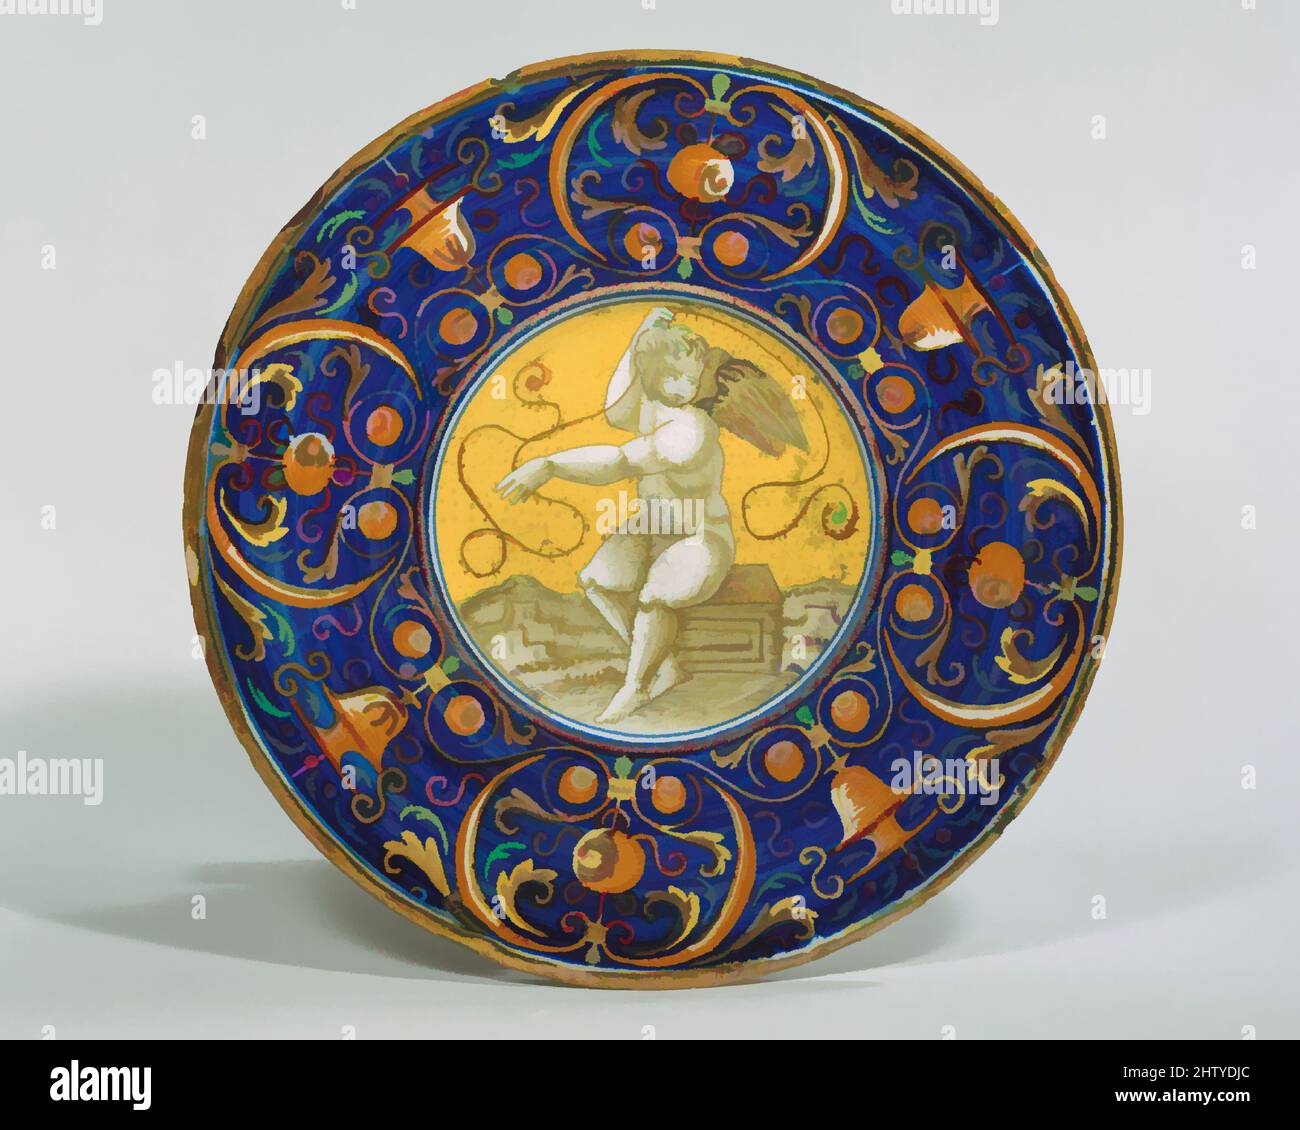 Art inspired by Plate (tagliere), 1534, Italian, Gubbio, Maiolica (tin-glazed earthenware), Diameter: 9 5/8 in. (24.4 cm), Ceramics-Pottery, Classic works modernized by Artotop with a splash of modernity. Shapes, color and value, eye-catching visual impact on art. Emotions through freedom of artworks in a contemporary way. A timeless message pursuing a wildly creative new direction. Artists turning to the digital medium and creating the Artotop NFT Stock Photo